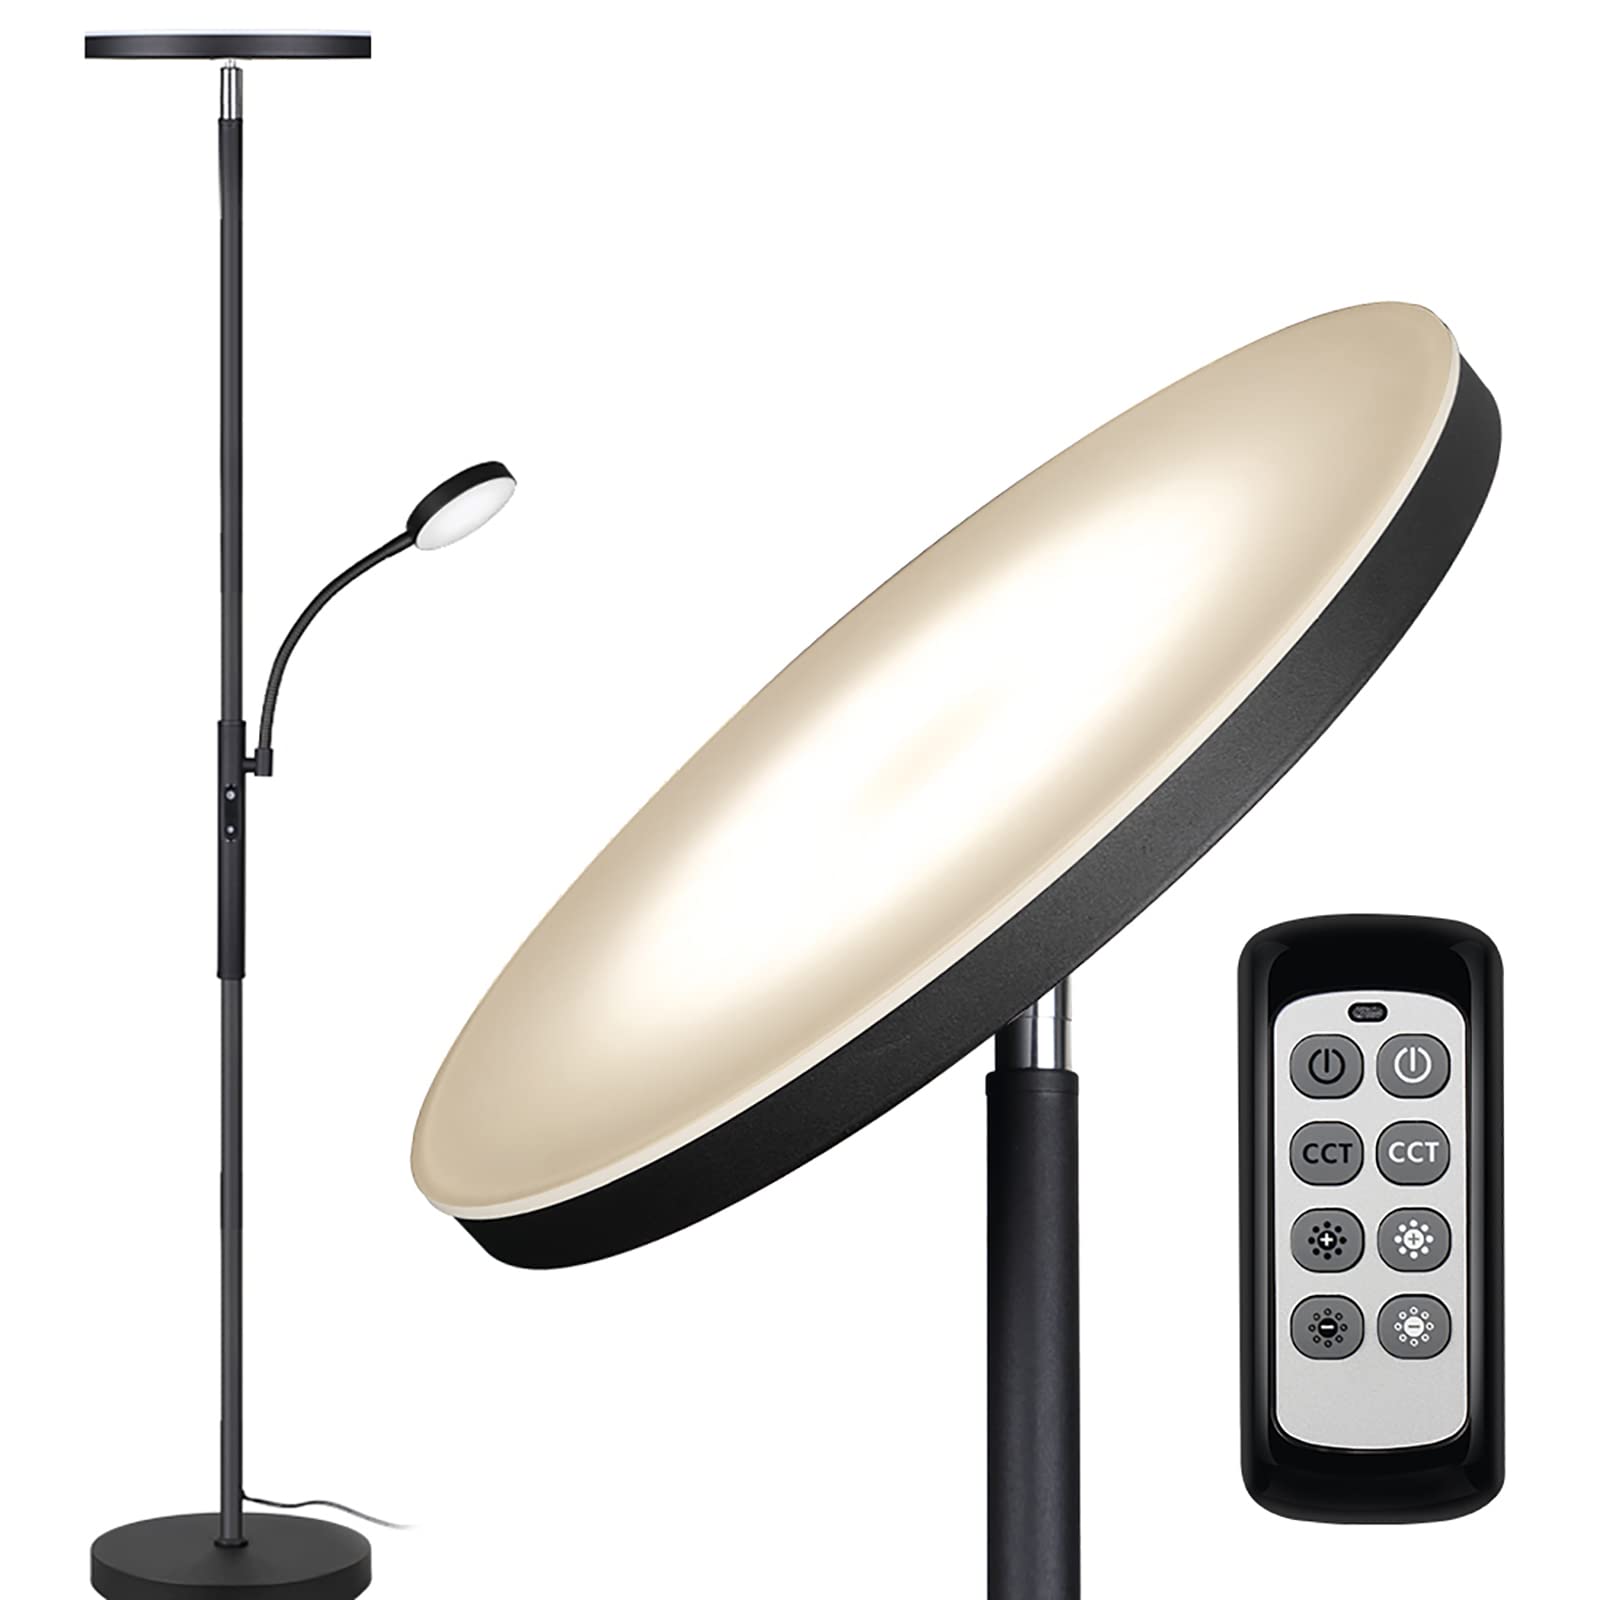 Dimunt Floor Lamp LED Floor Lamps for Living Room Bright Lighting, 27W/2000LM Main Light and 7W/350LM Side Reading Lamp, Adjustable 3 Colors Tall Lamp with Remote & Touch Control